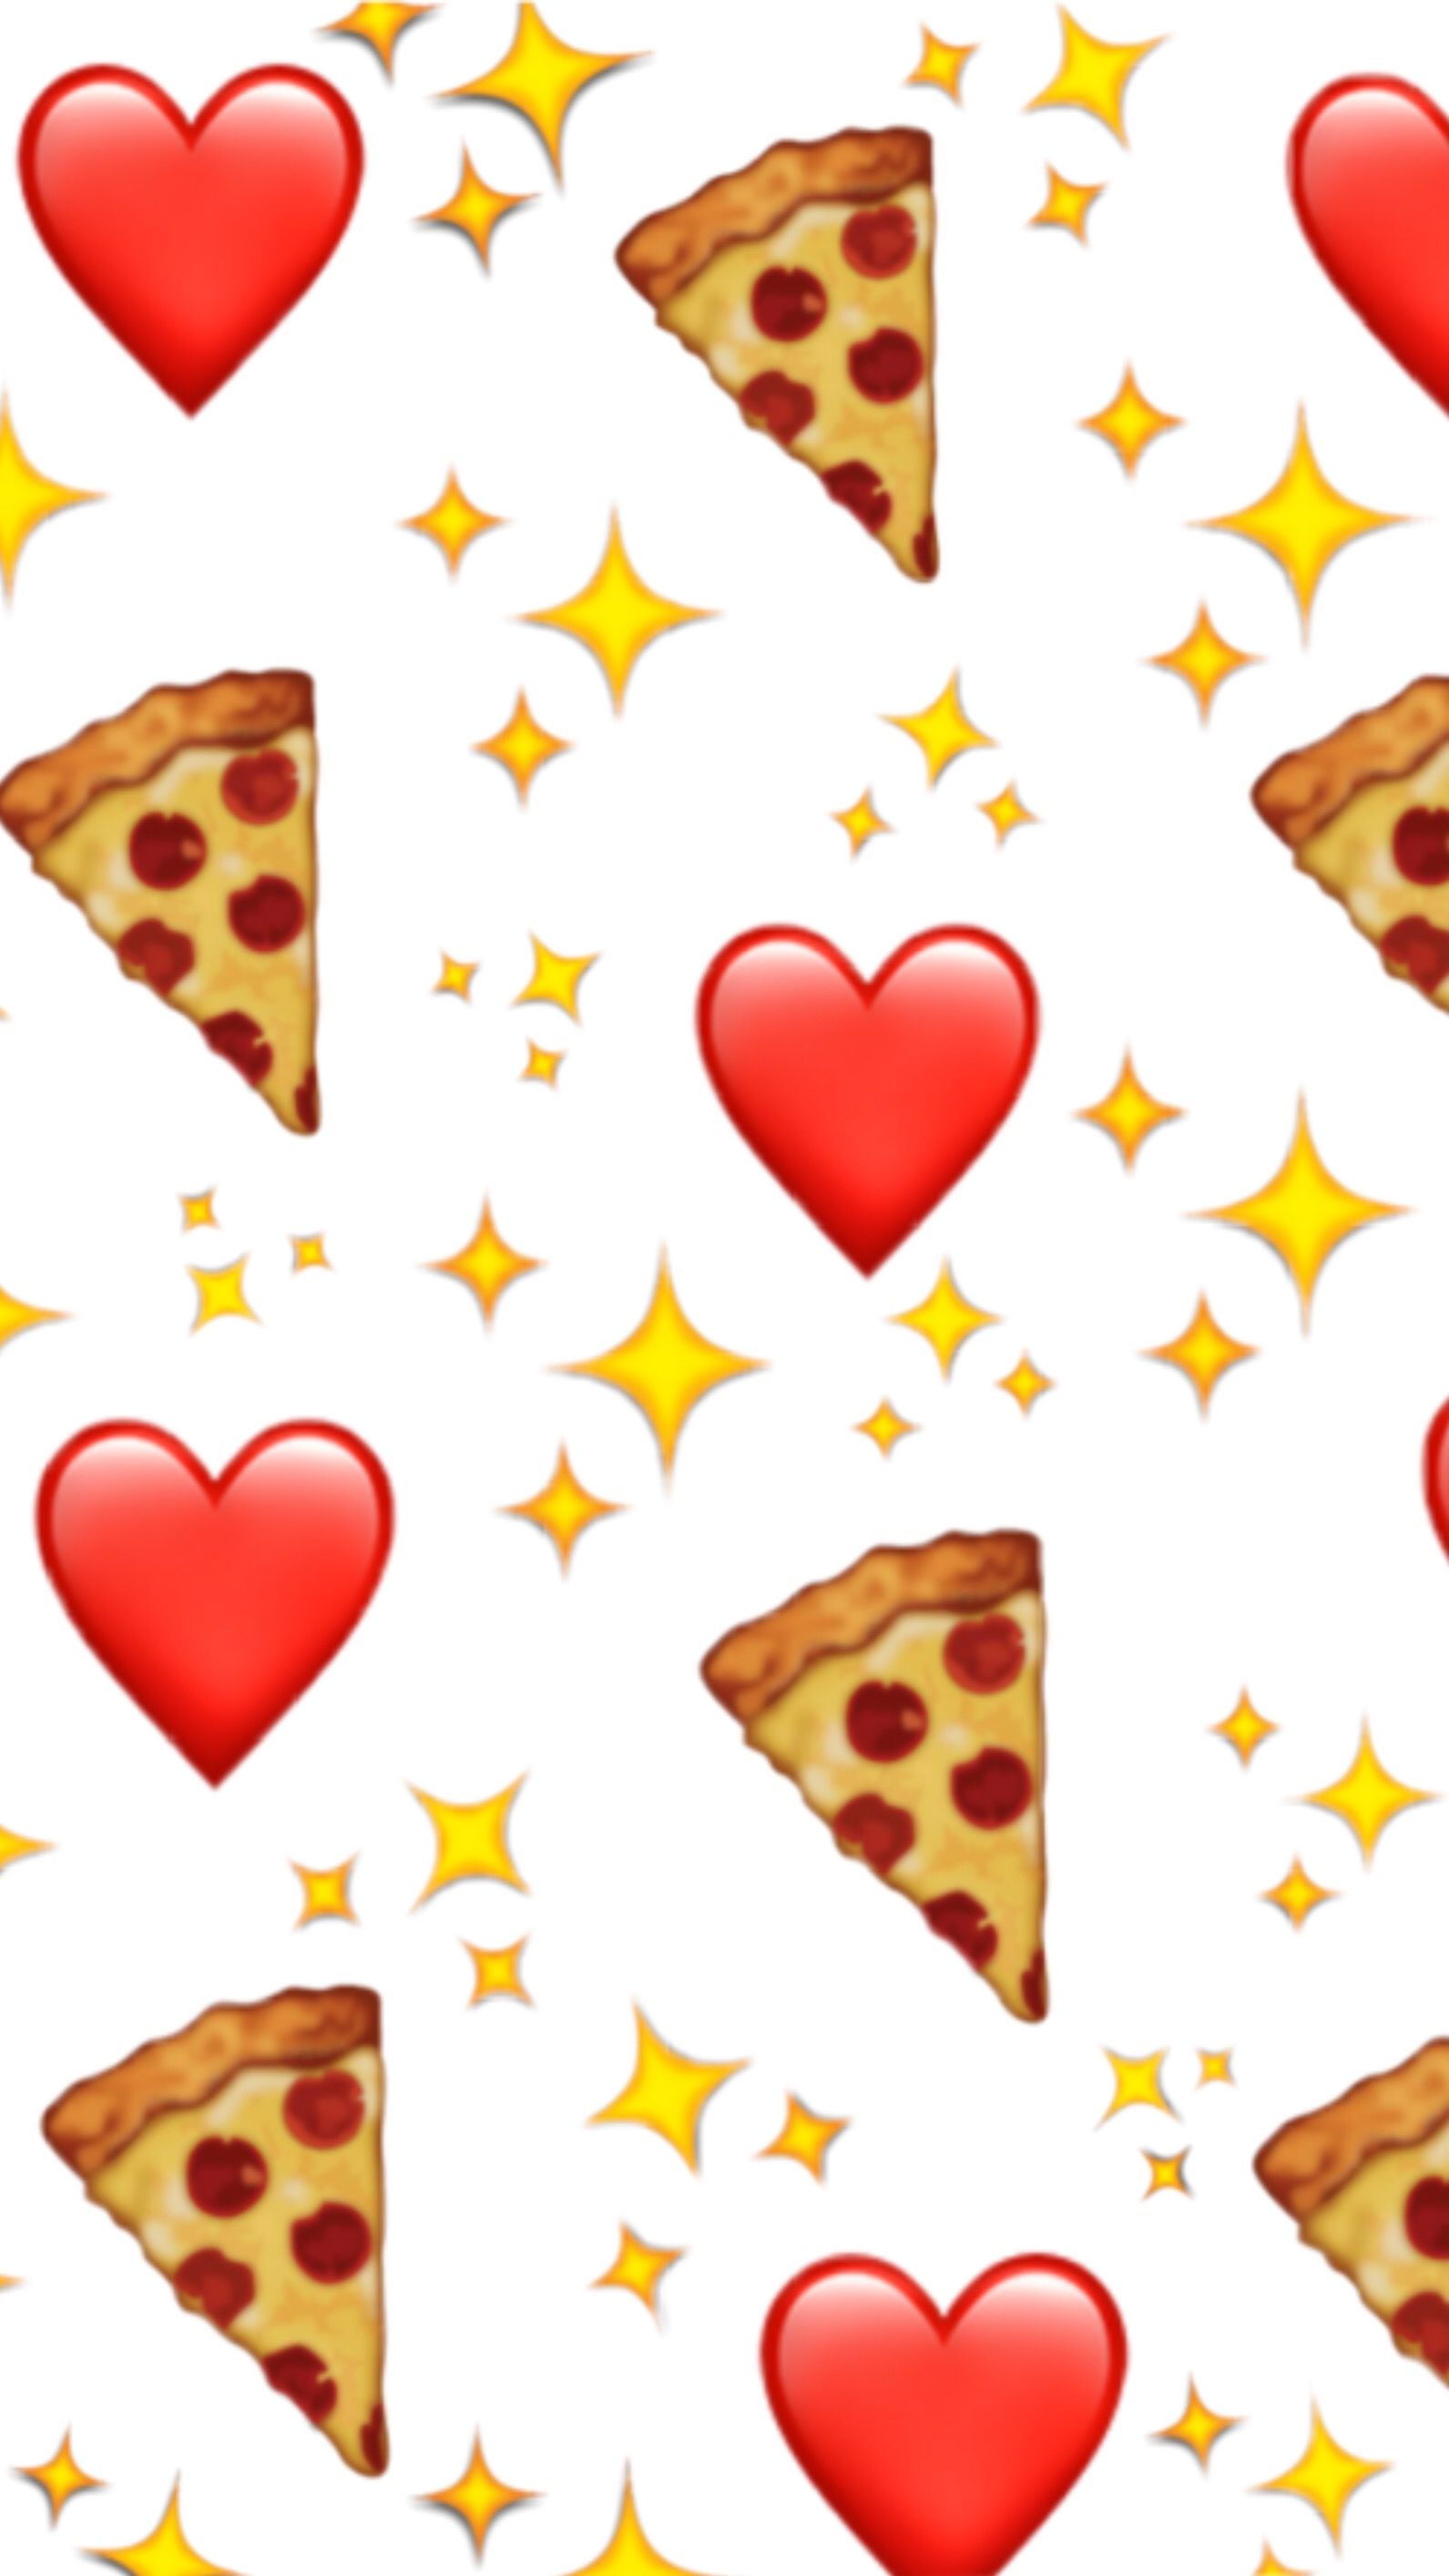 A pizza slice, heart and star emojis on a white background - Pizza